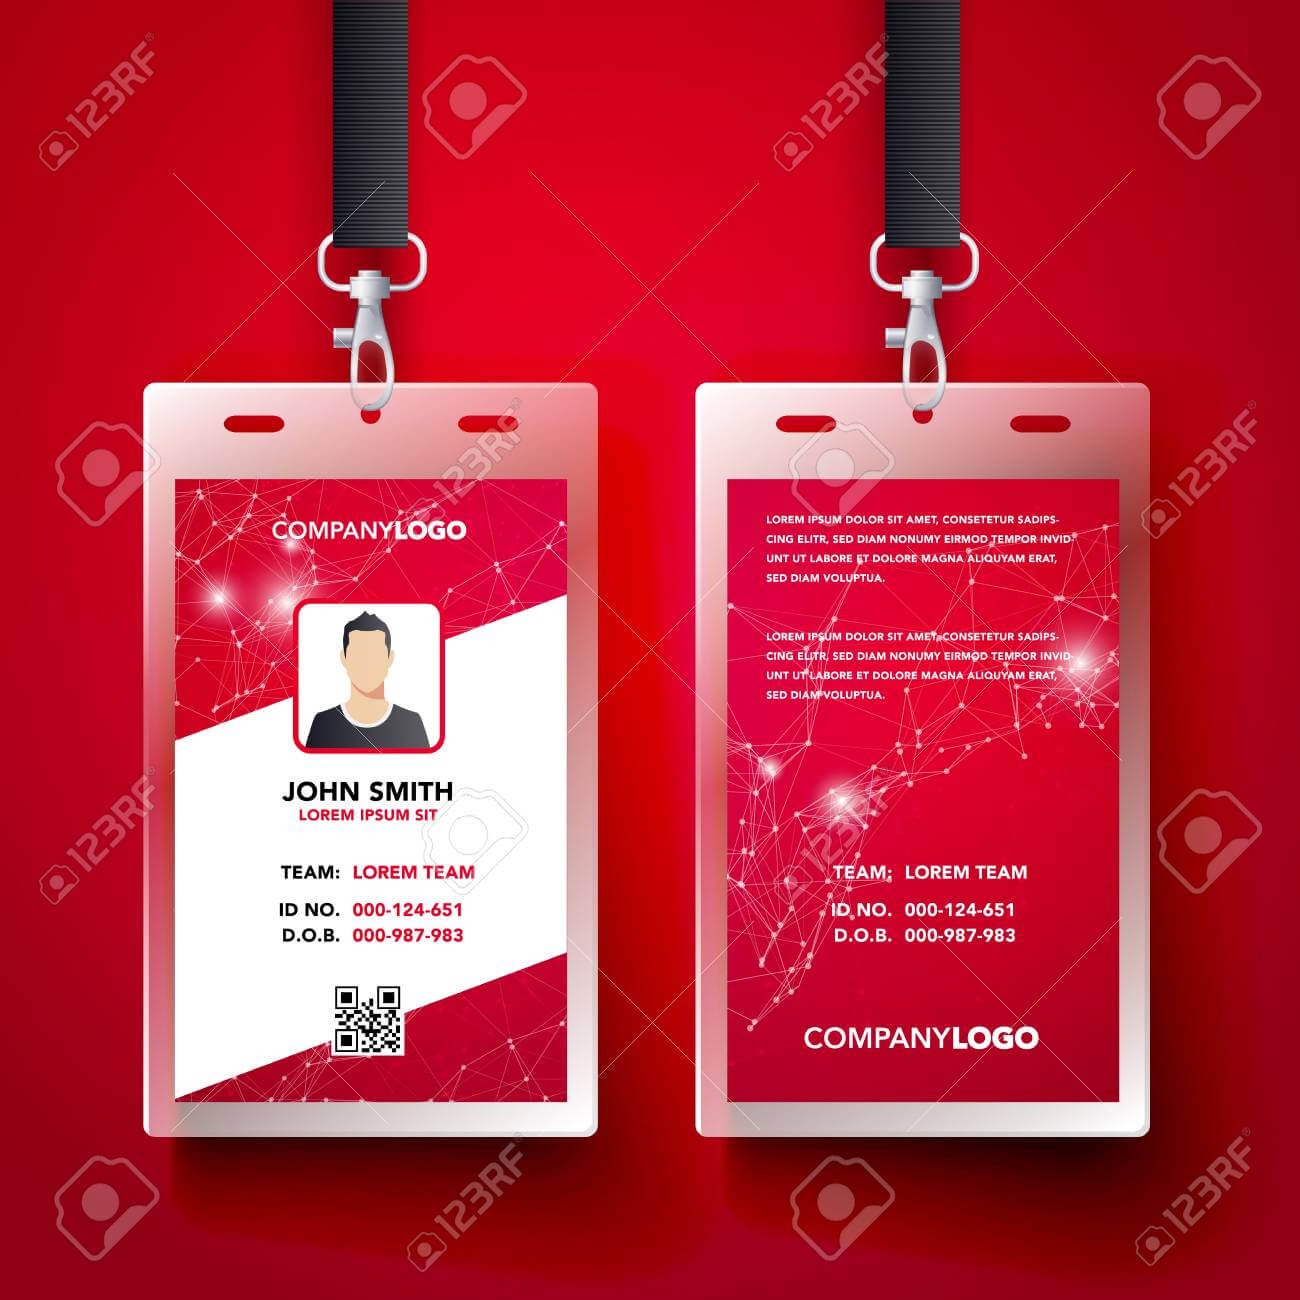 Vector Illustration Red Corporate Id Card Design Template Set Pertaining To Company Id Card Design Template